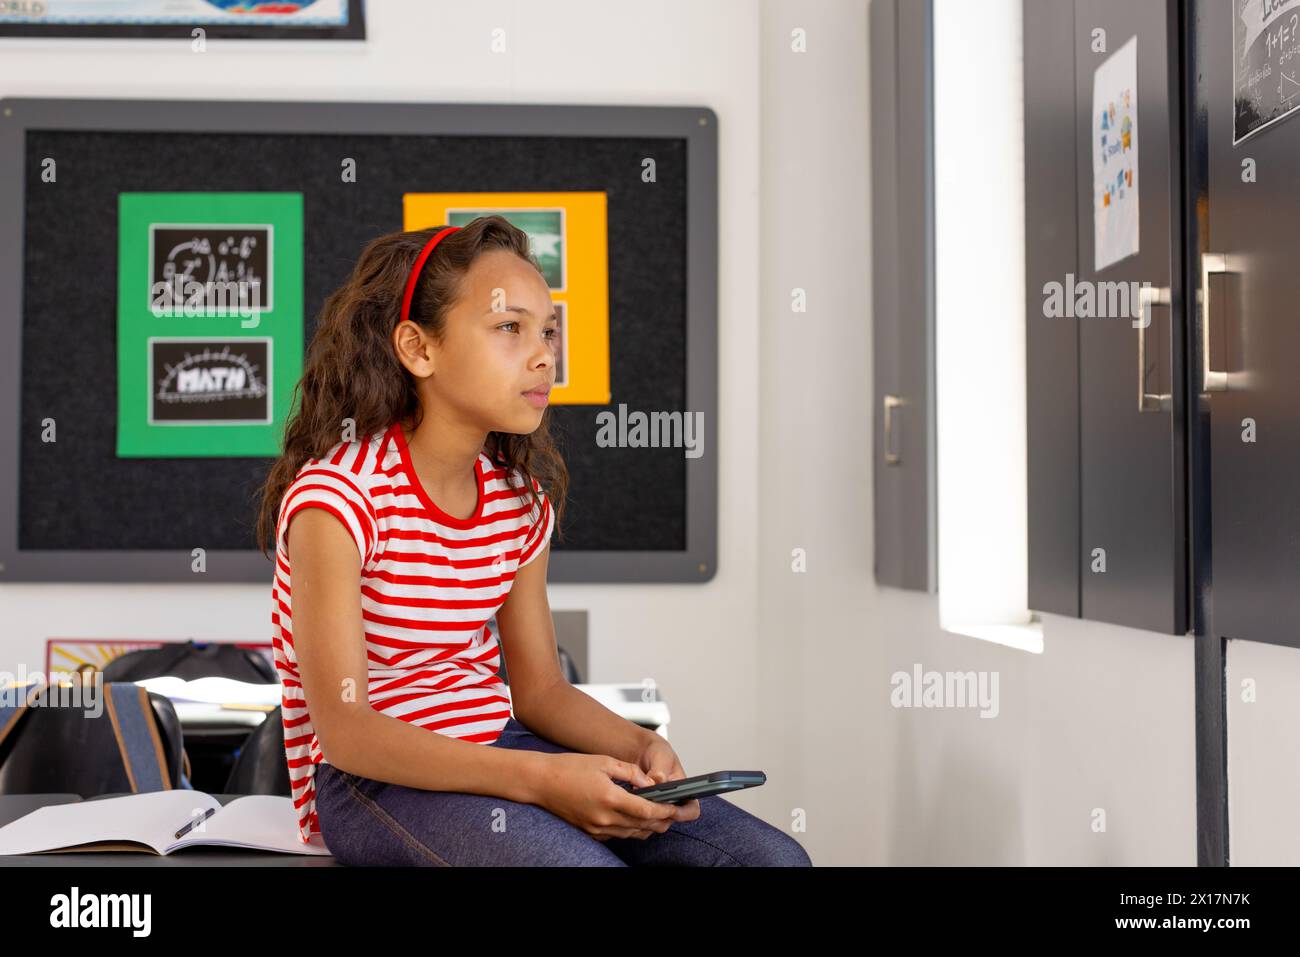 In school, in classroom, young biracial girl holding a smartphone looks thoughtful Stock Photo